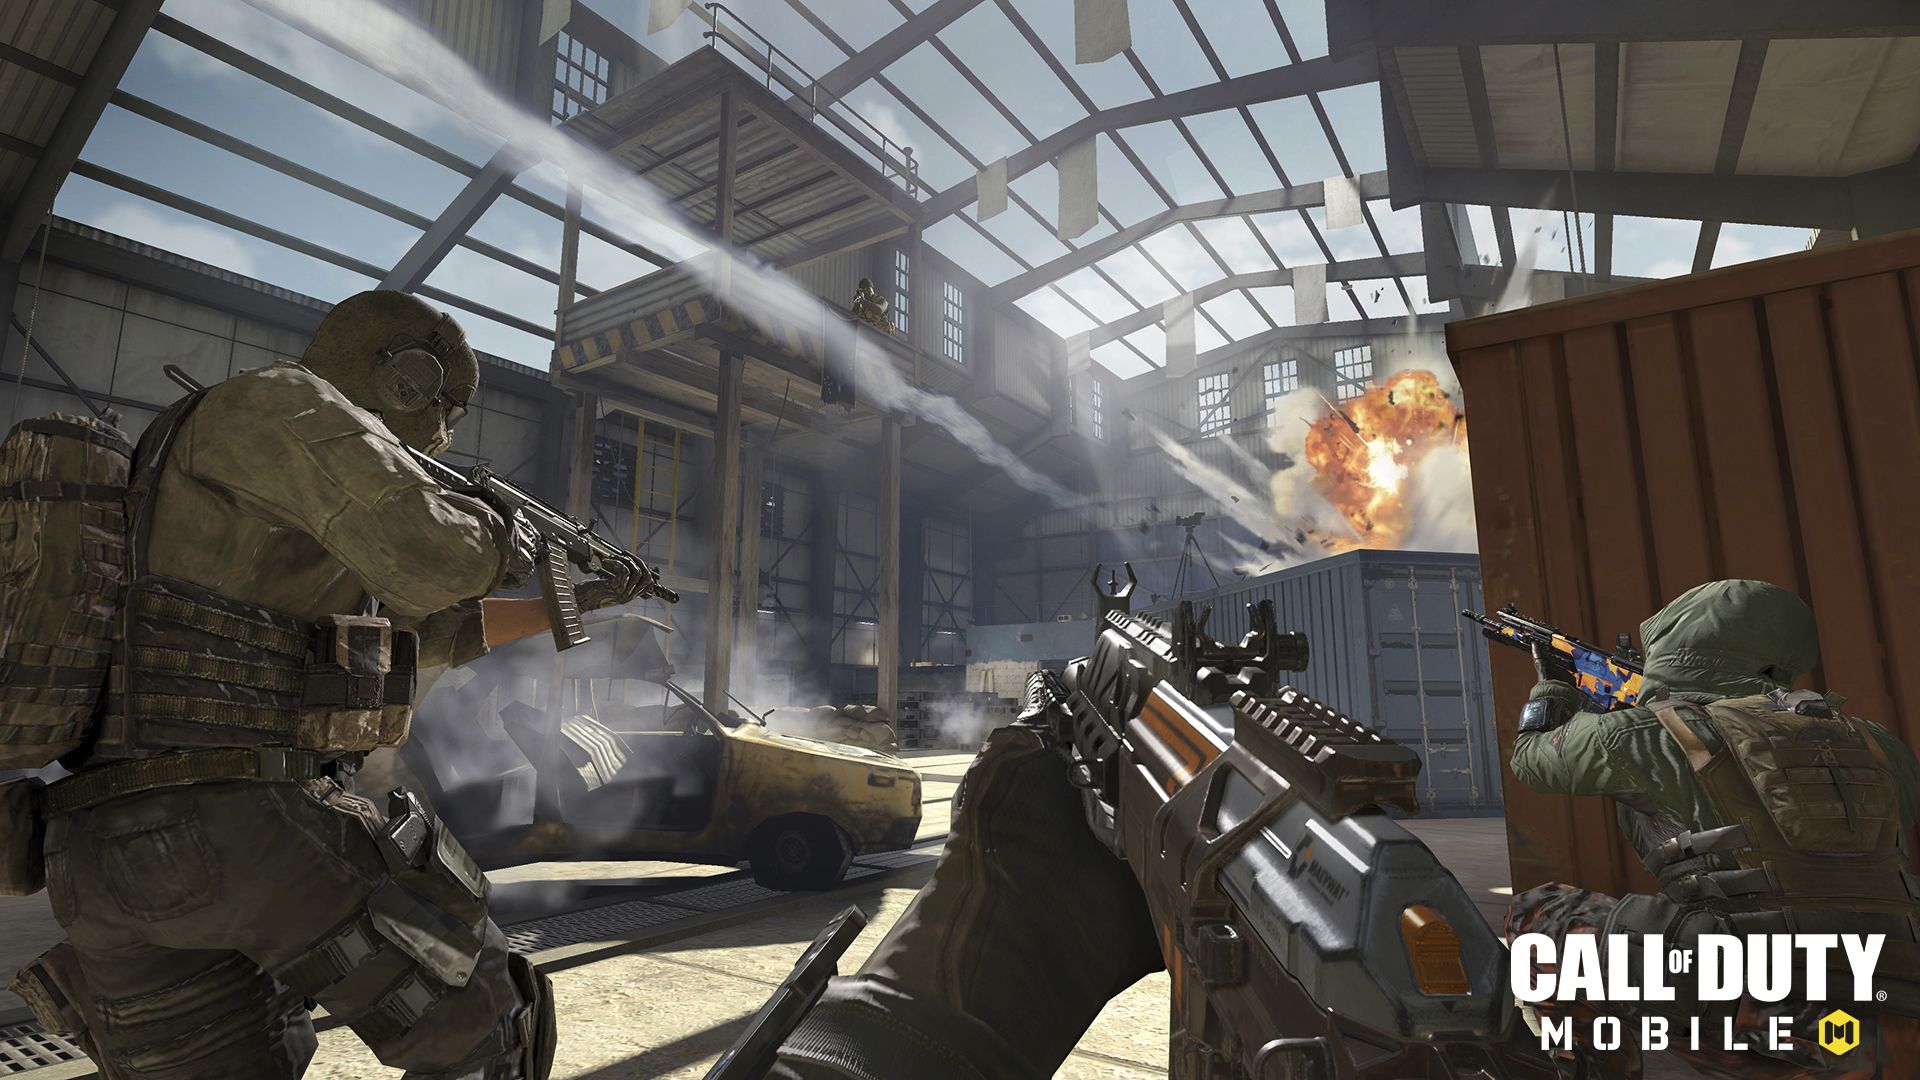 Sensor Tower - Call of Duty: Mobile already achieves 20 million installs